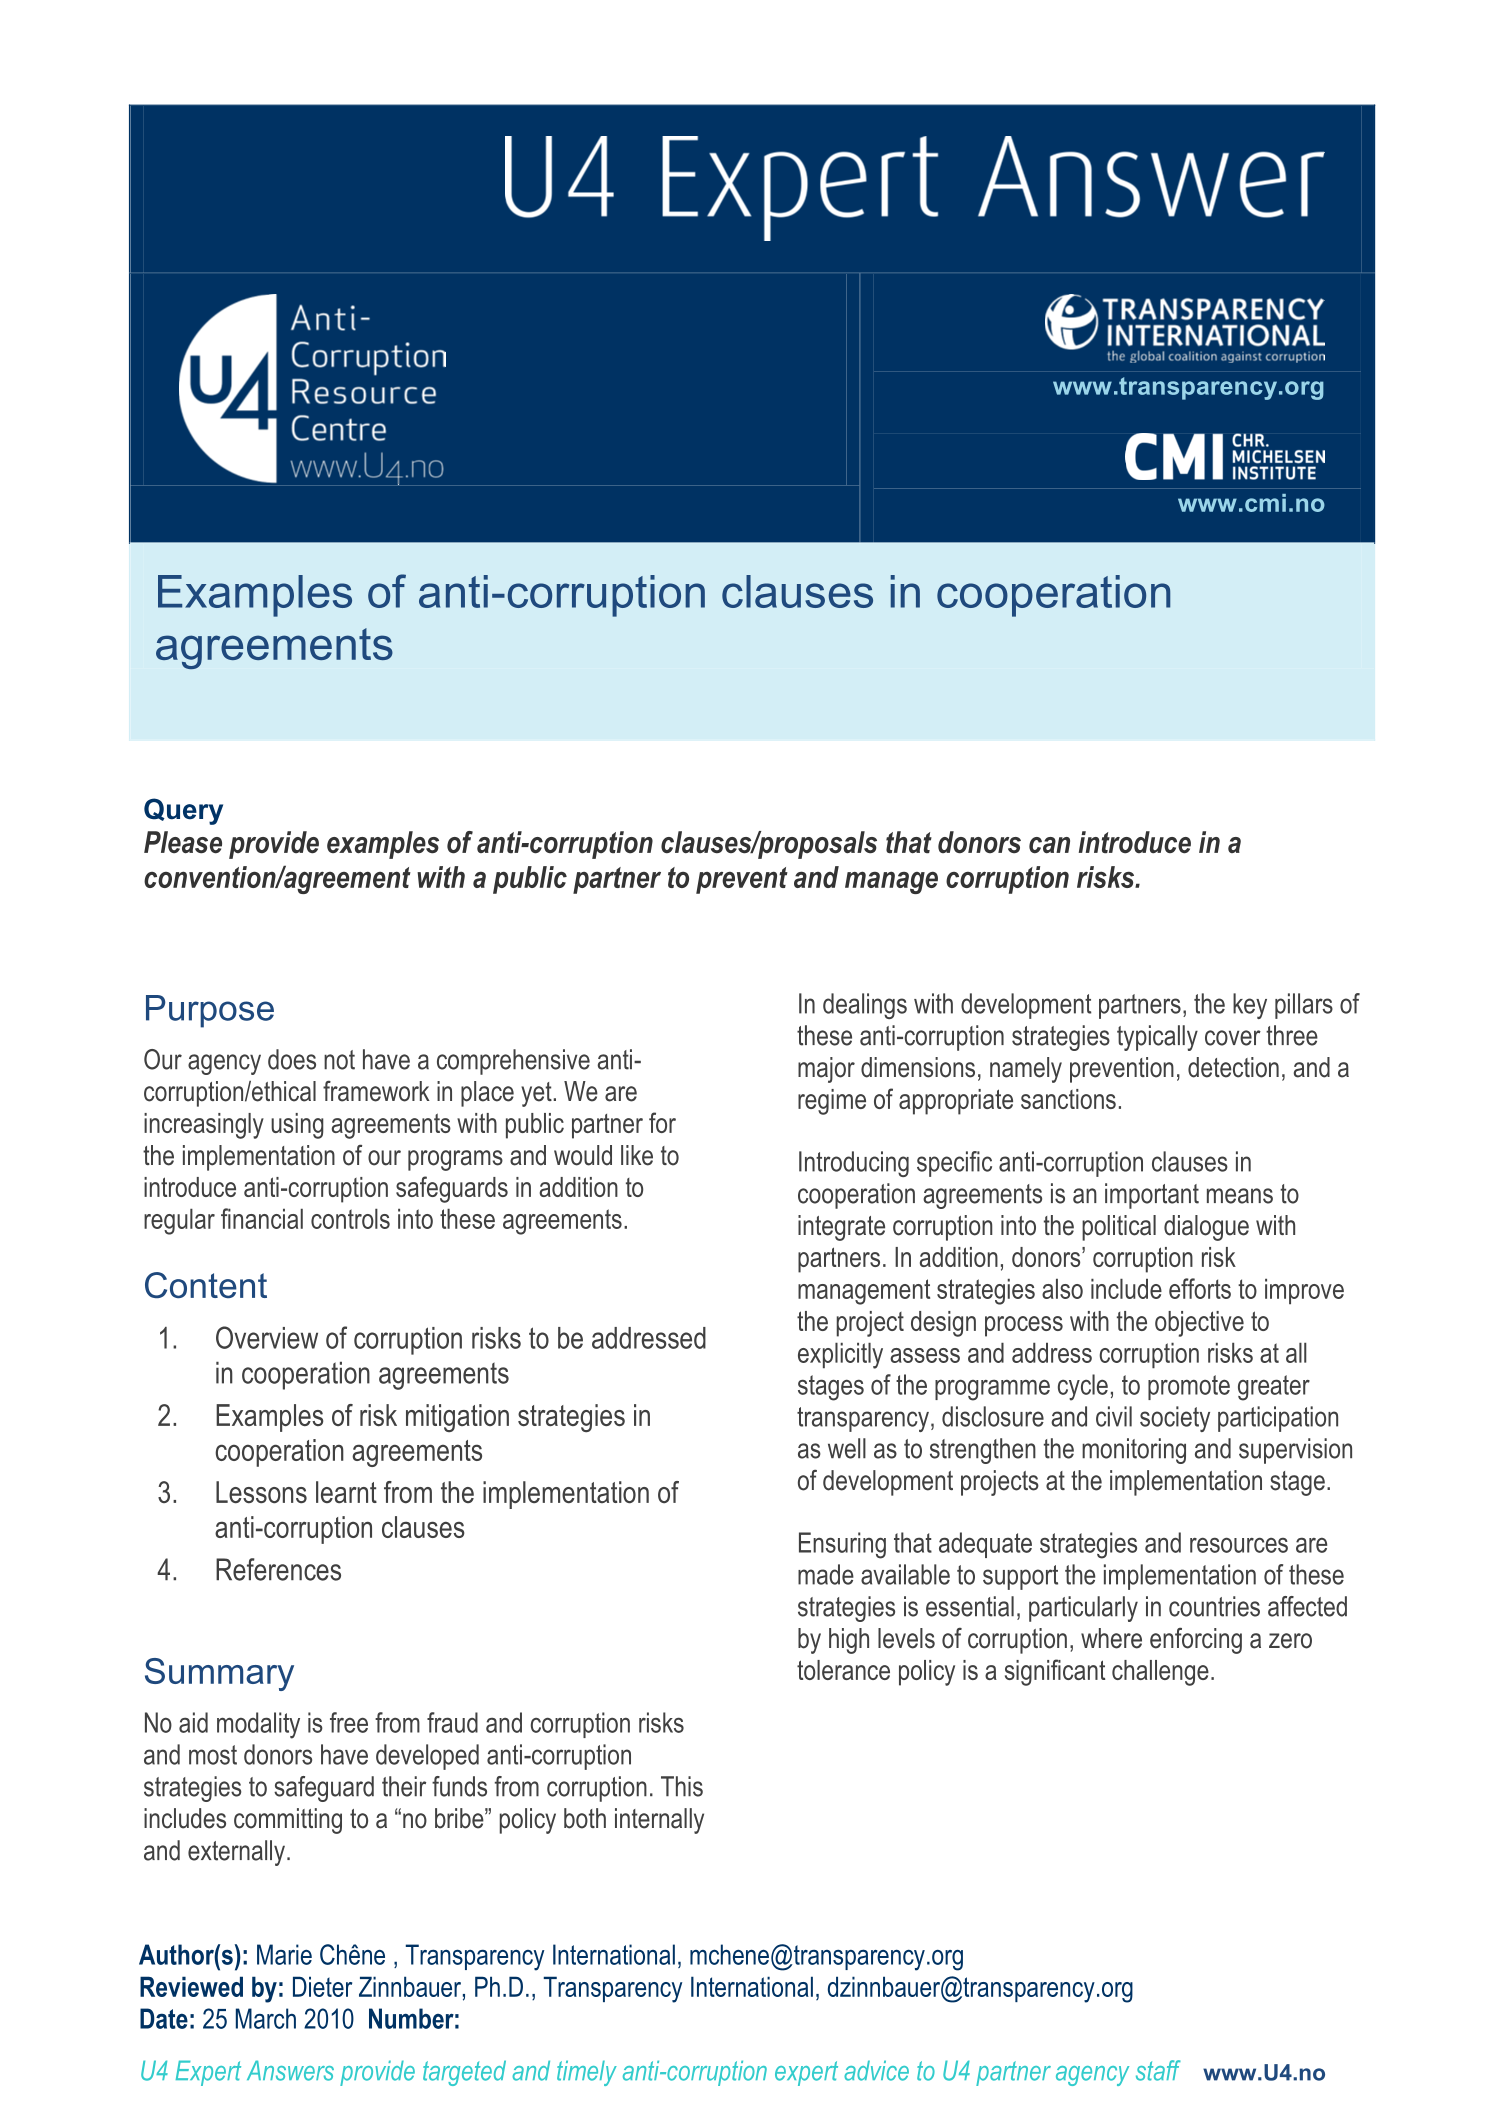 Examples of anti-corruption clauses in cooperation agreements